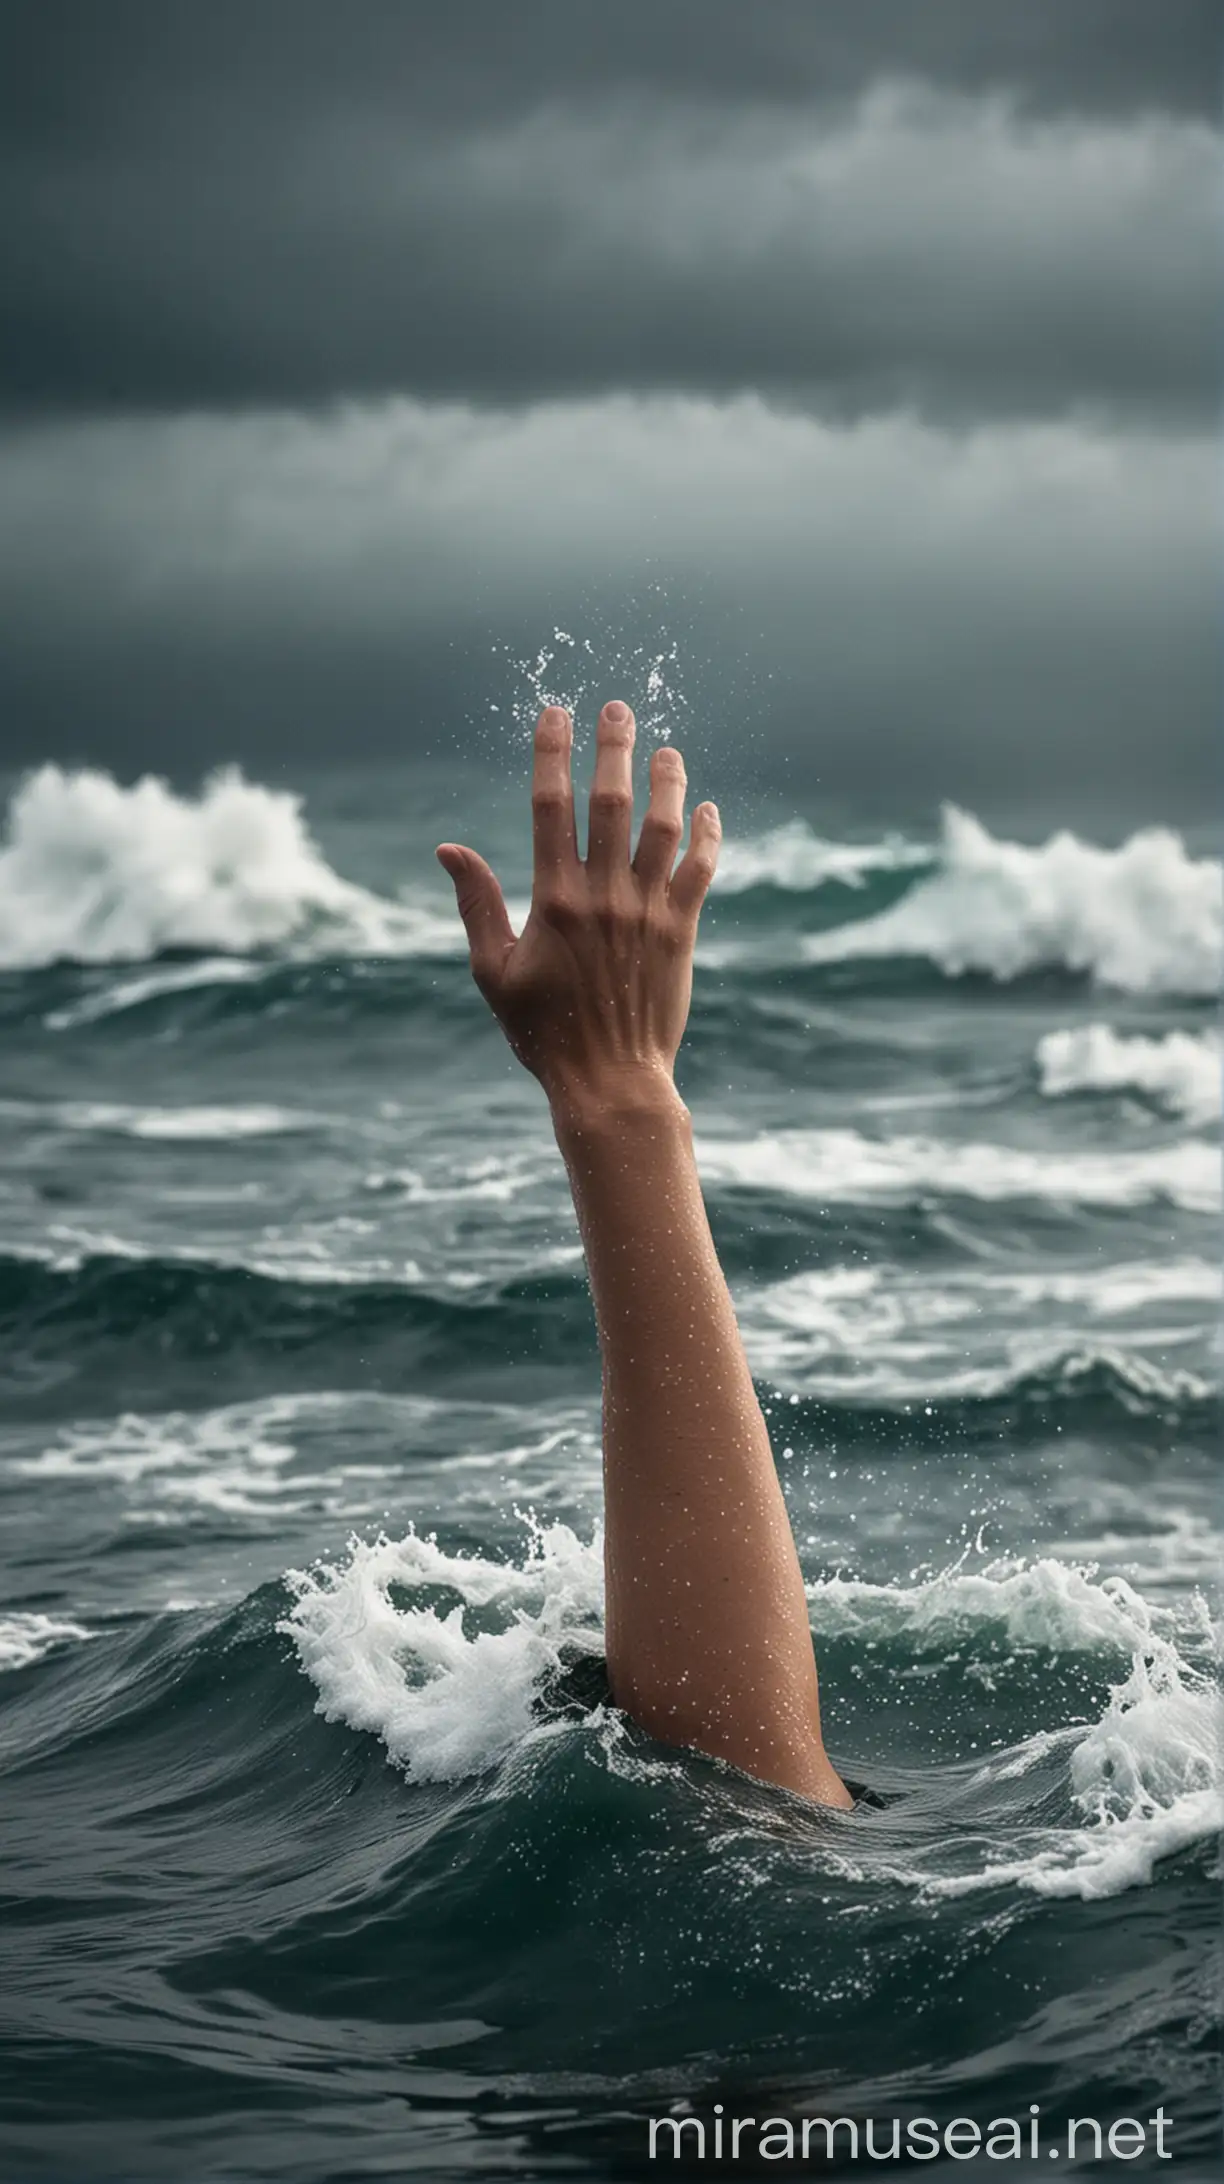 Human Female Arm Emerging from Stormy Ocean